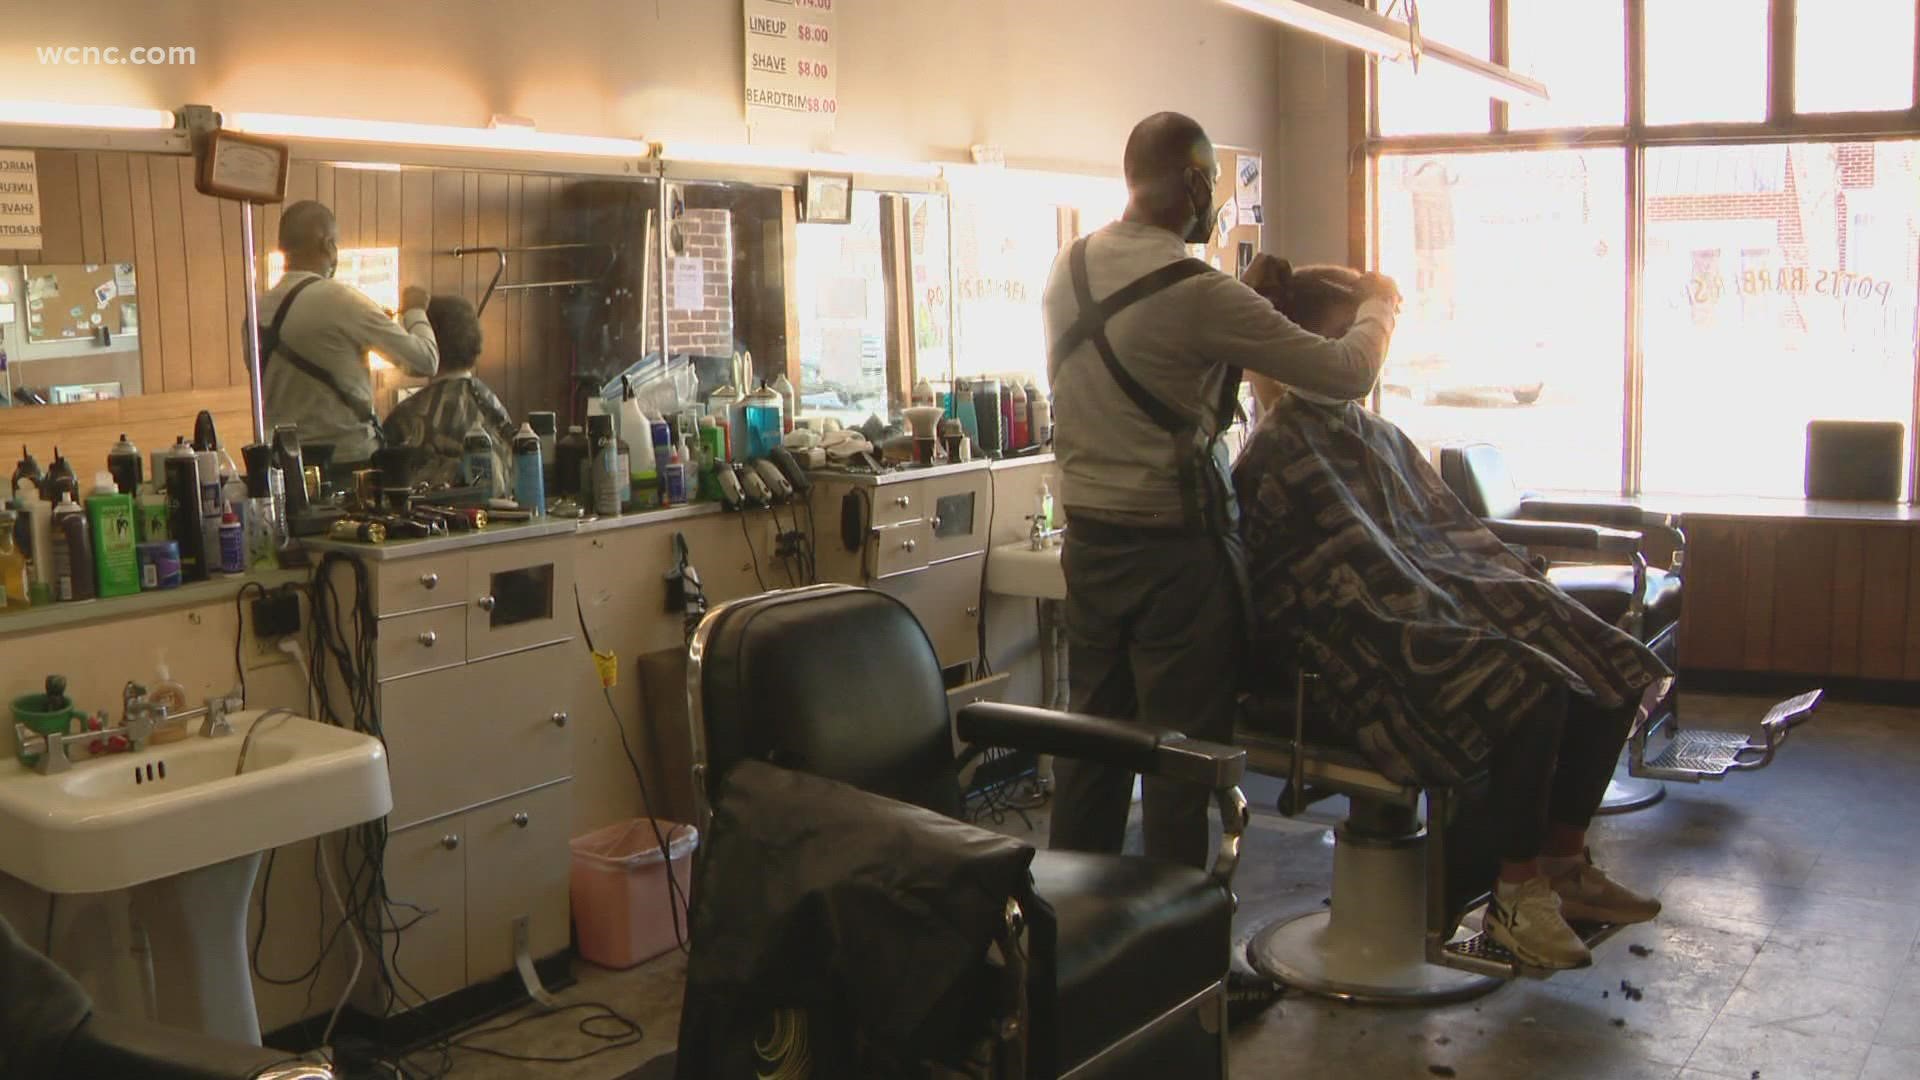 Pott's Barber Shop has had a brick storefront in Cornelius since the 1960s but was formally established in 1952.